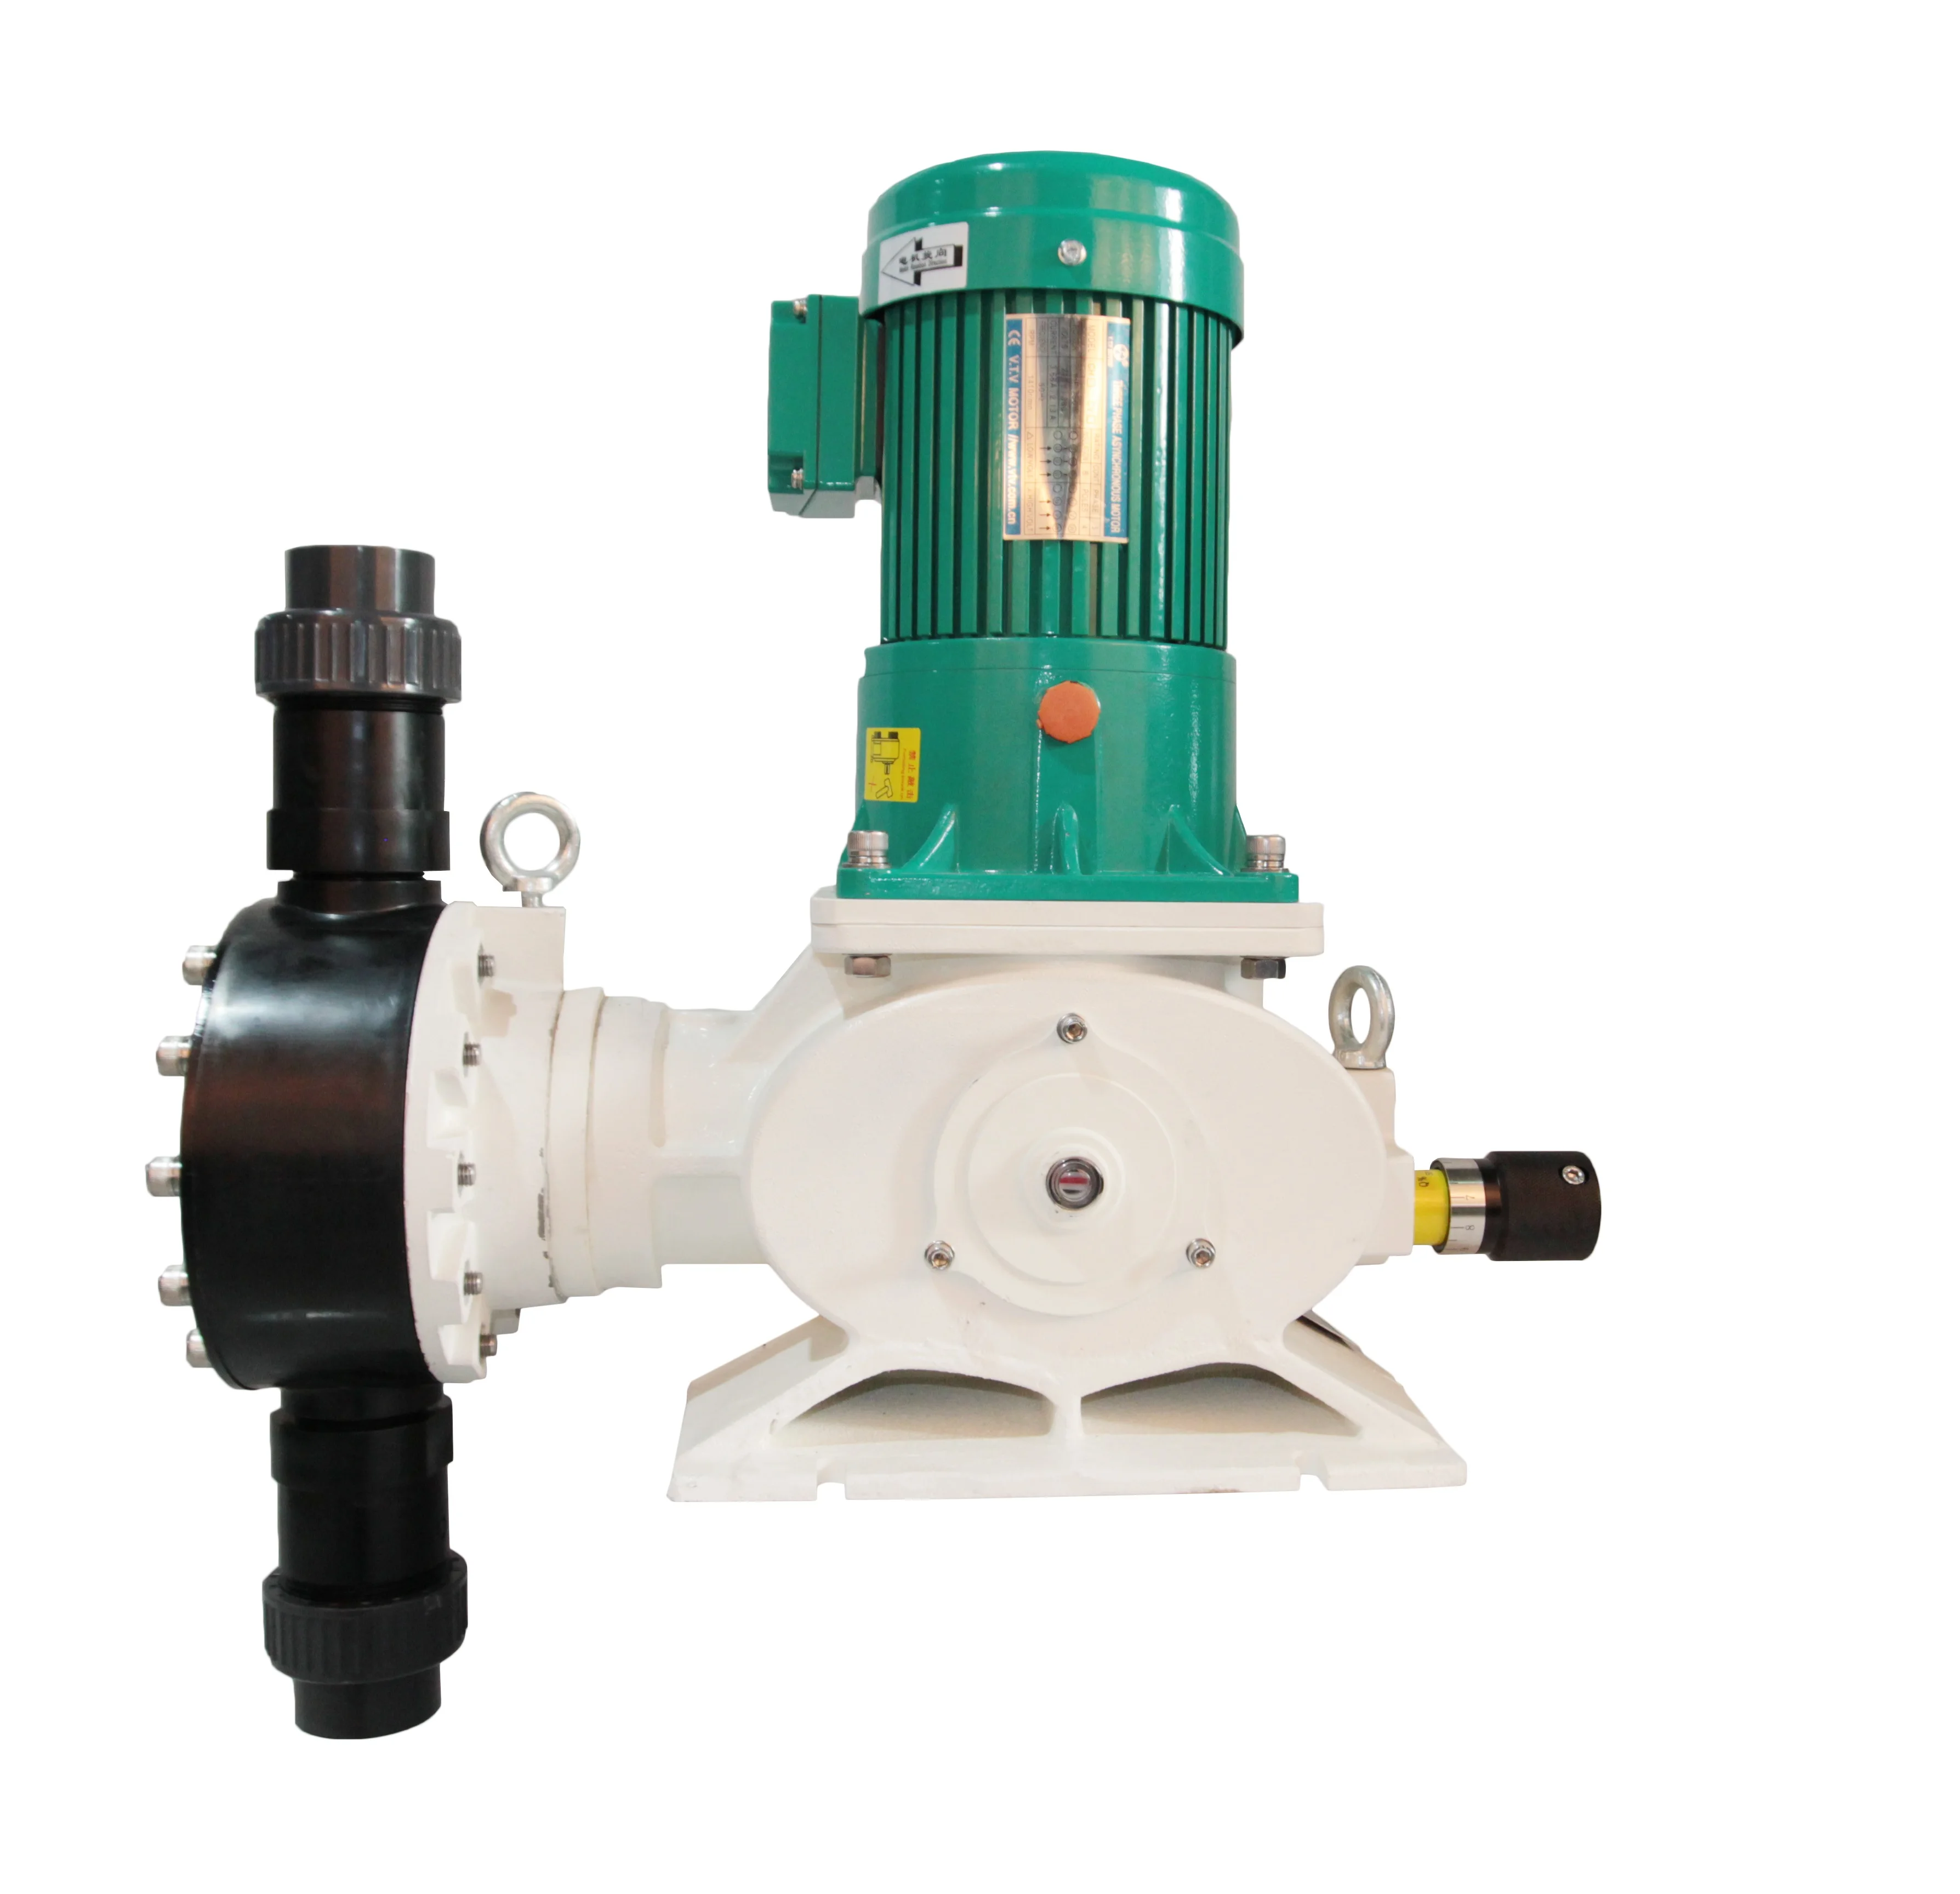 NEWDOSE 1300L Dosing Pump for watert treatment or chemical industry